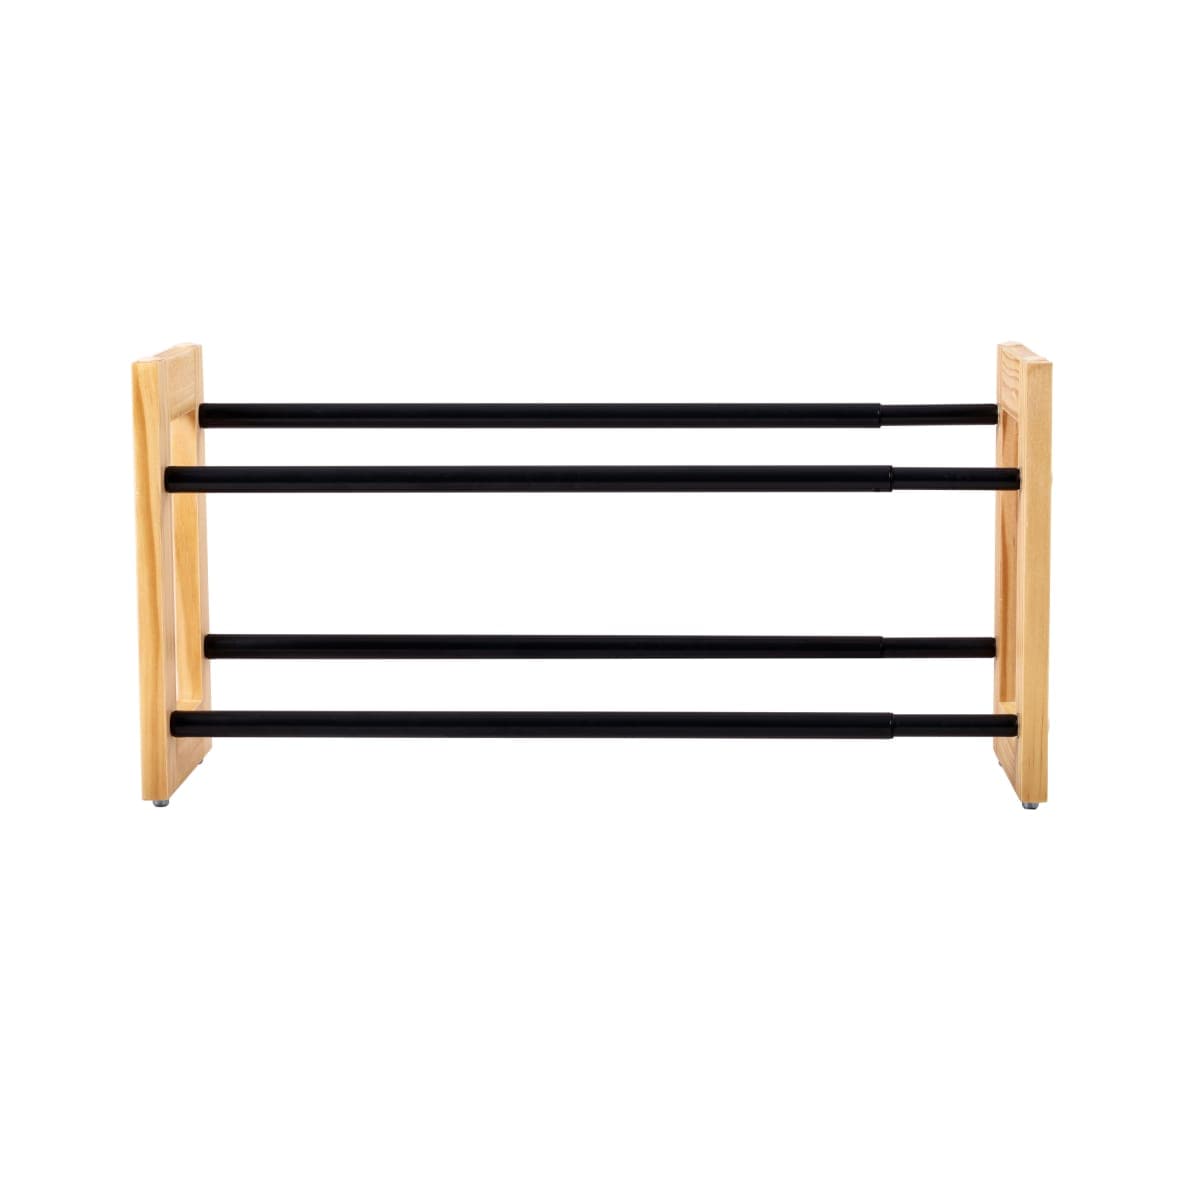 FLACKY EXTENDABLE AND STACKABLE WOODEN METAL SHOE SHELF SPACEO - best price from Maltashopper.com BR410006321